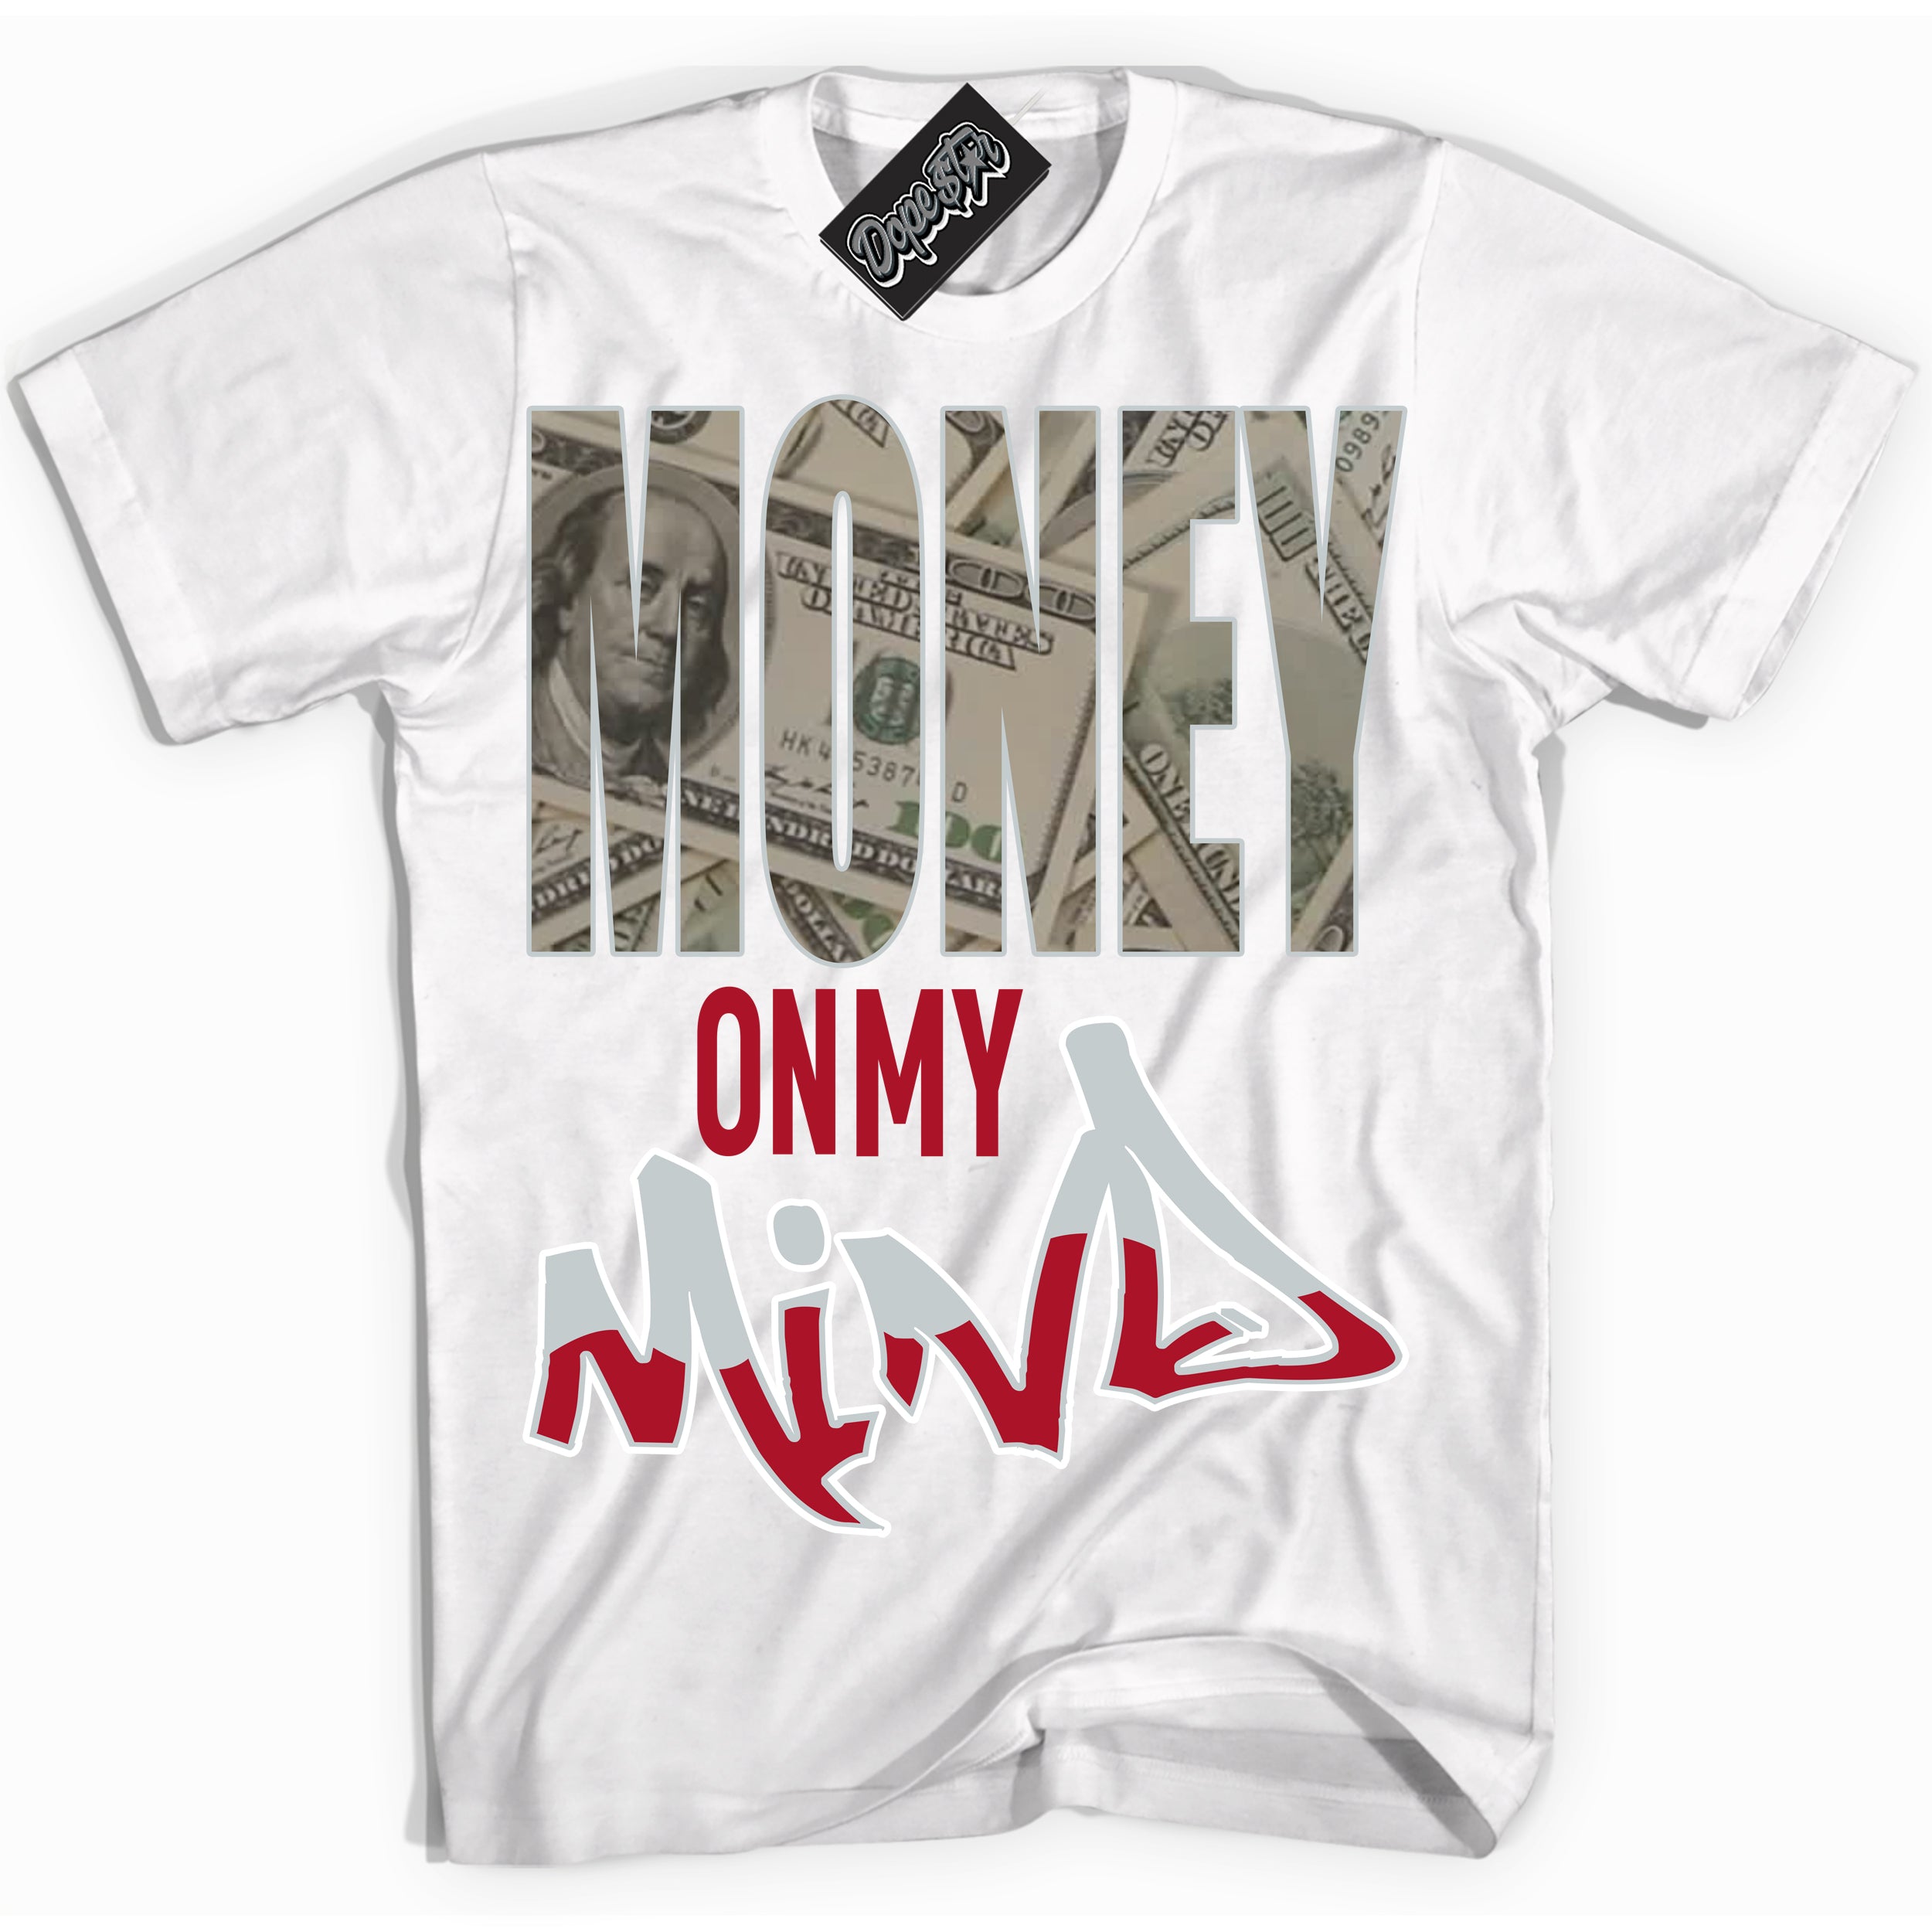 Cool White Shirt with “ Money On My Mind” design that perfectly matches Reverse Ultraman Sneakers.